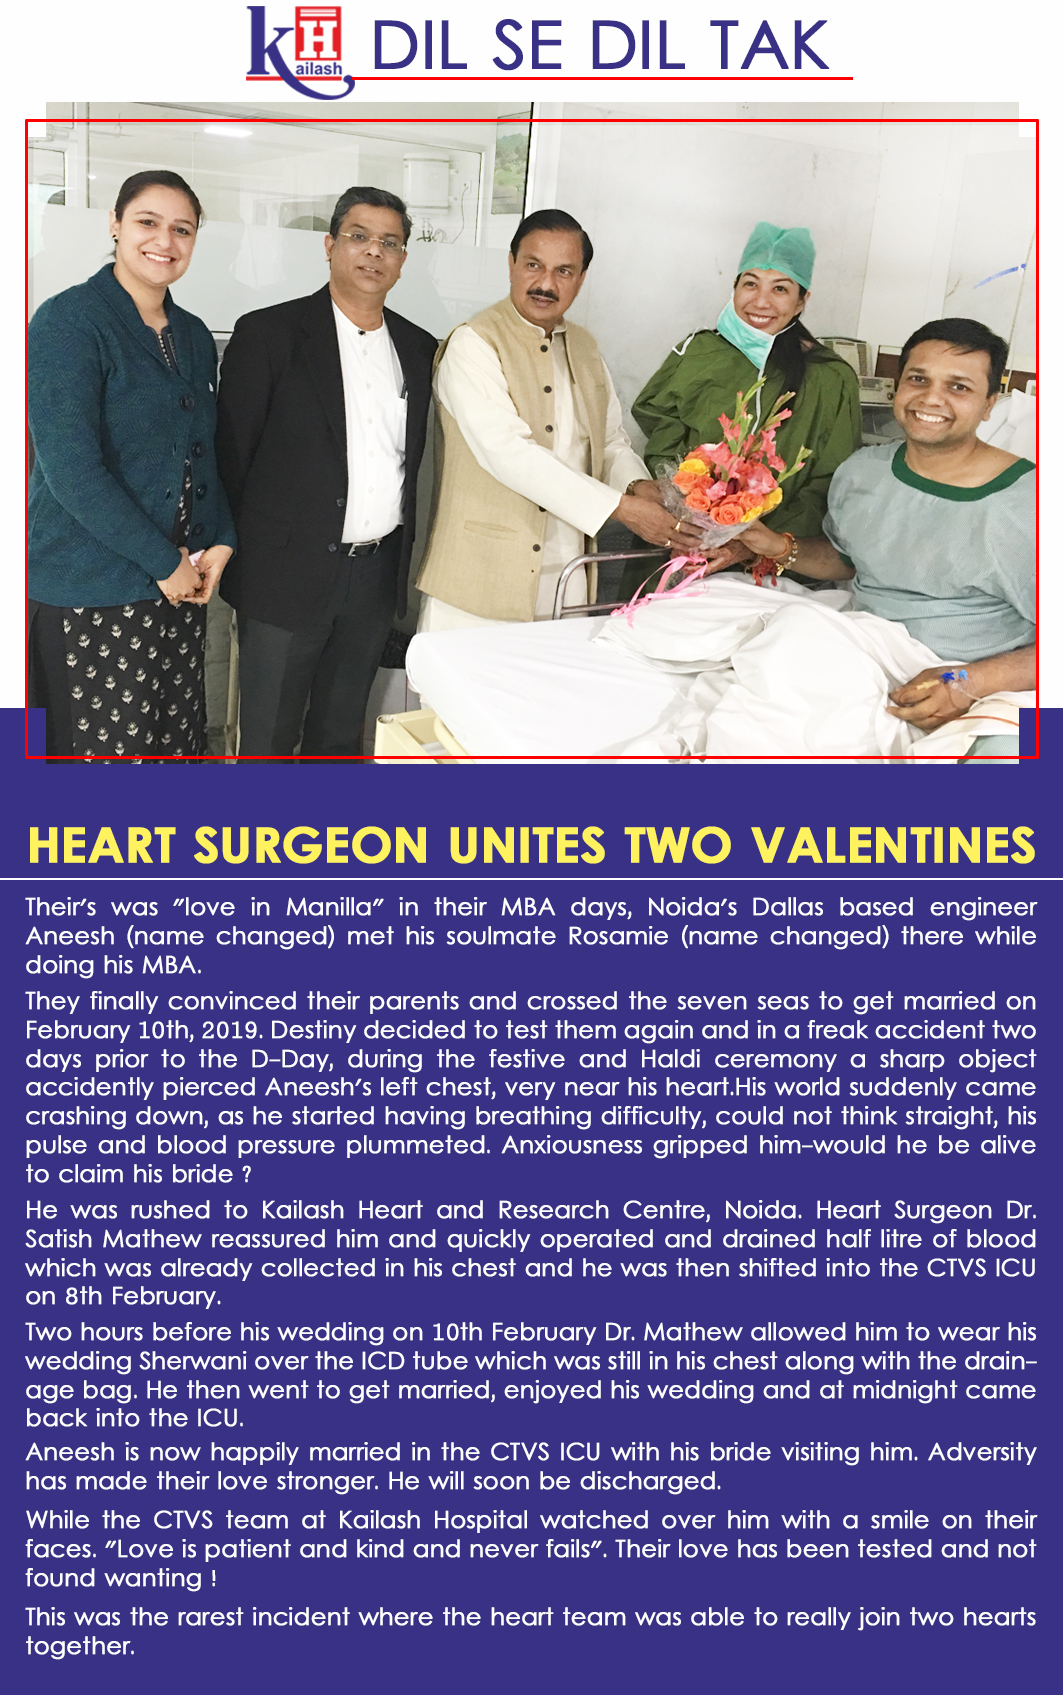 A Successful Heart Surgery by the Best Heart Surgeon of Kailash Hospital, Noida